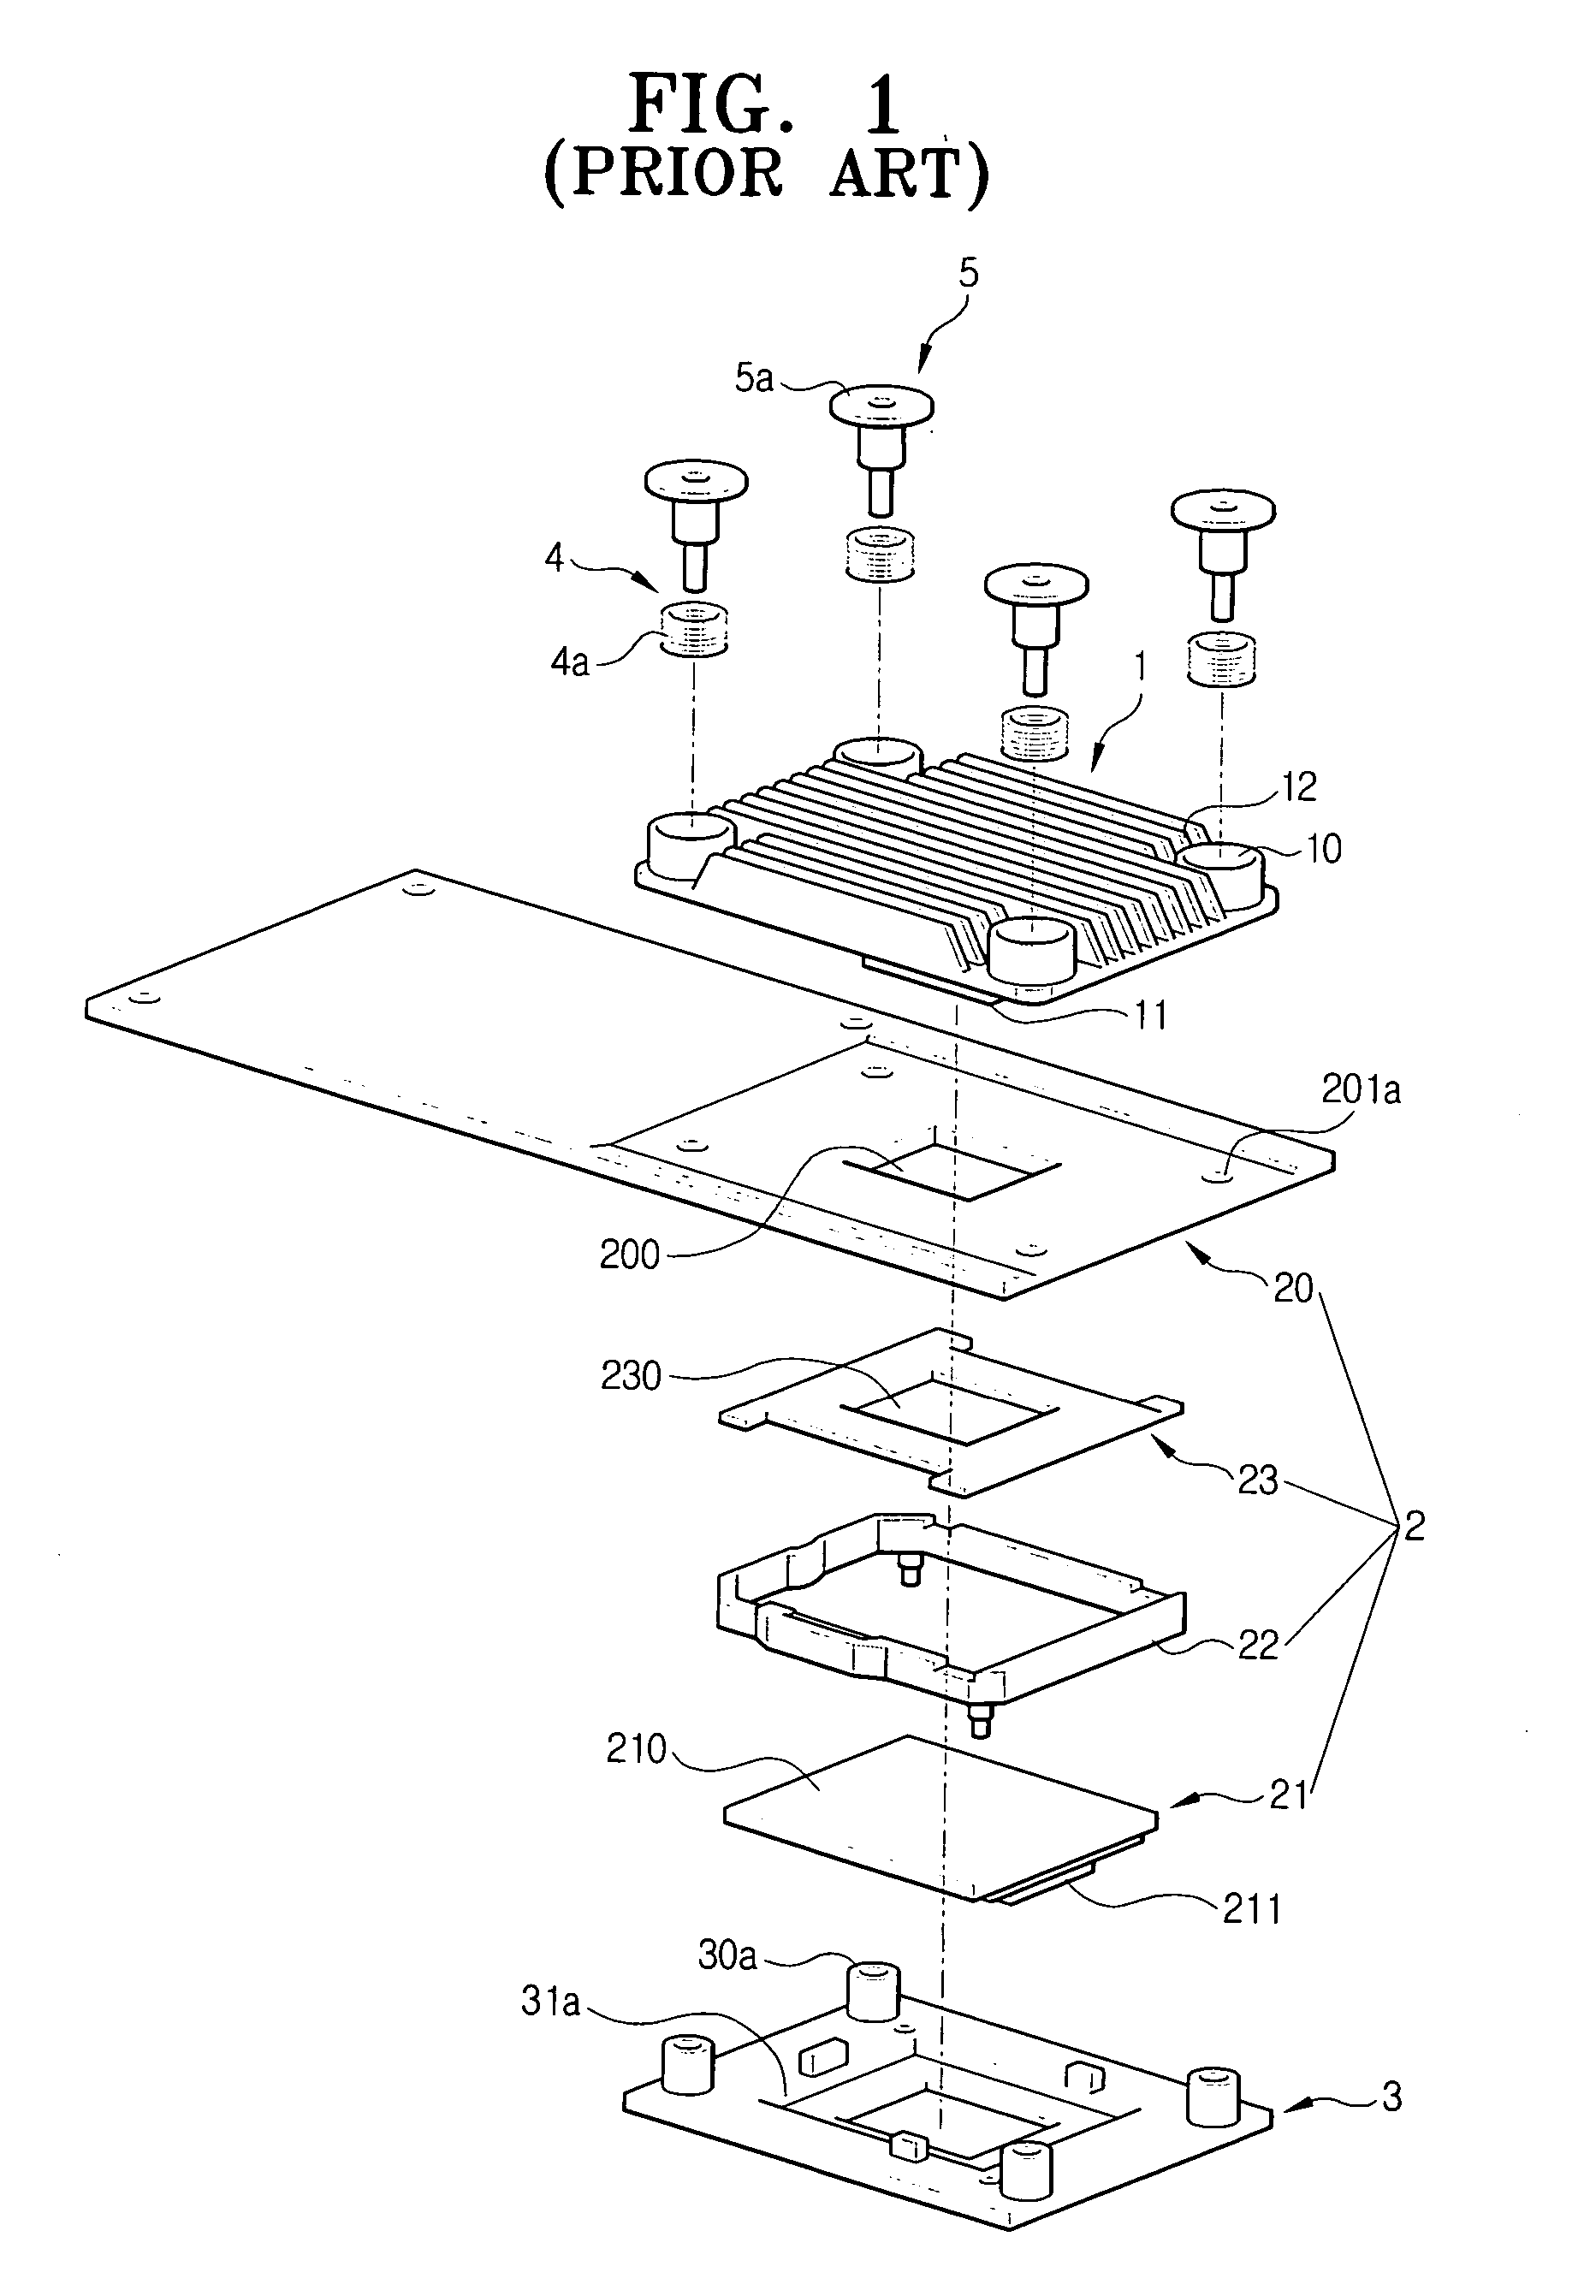 Digital micro-mirror device (DMD) assembly for an optical projection system